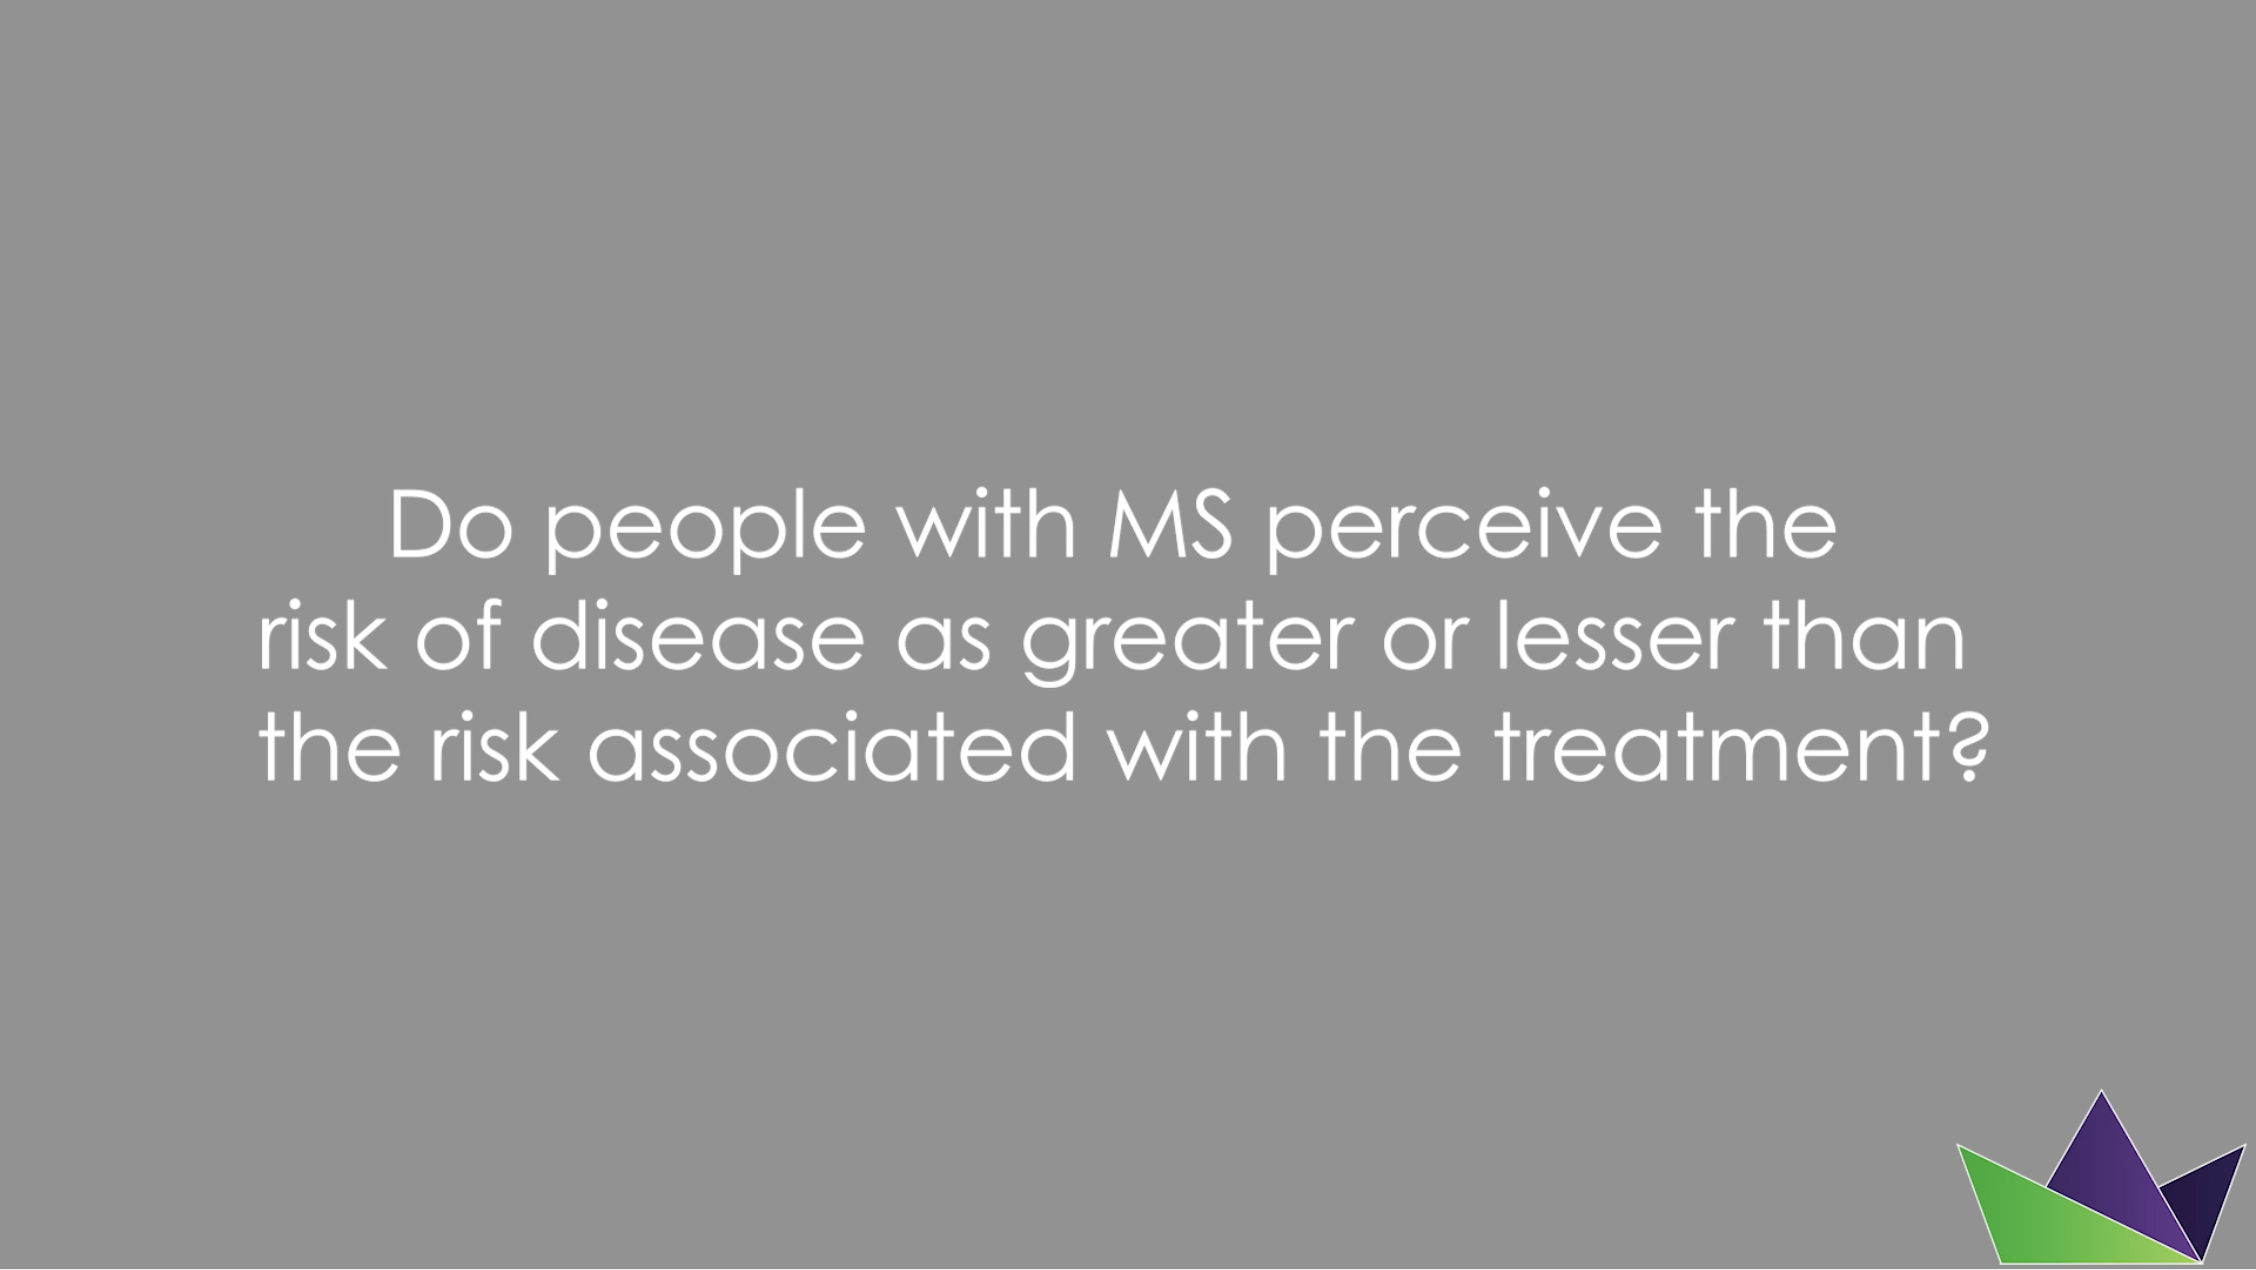 Do people with MS perceive the risk of disease as greater or lesser than the risk associated with the treatment?